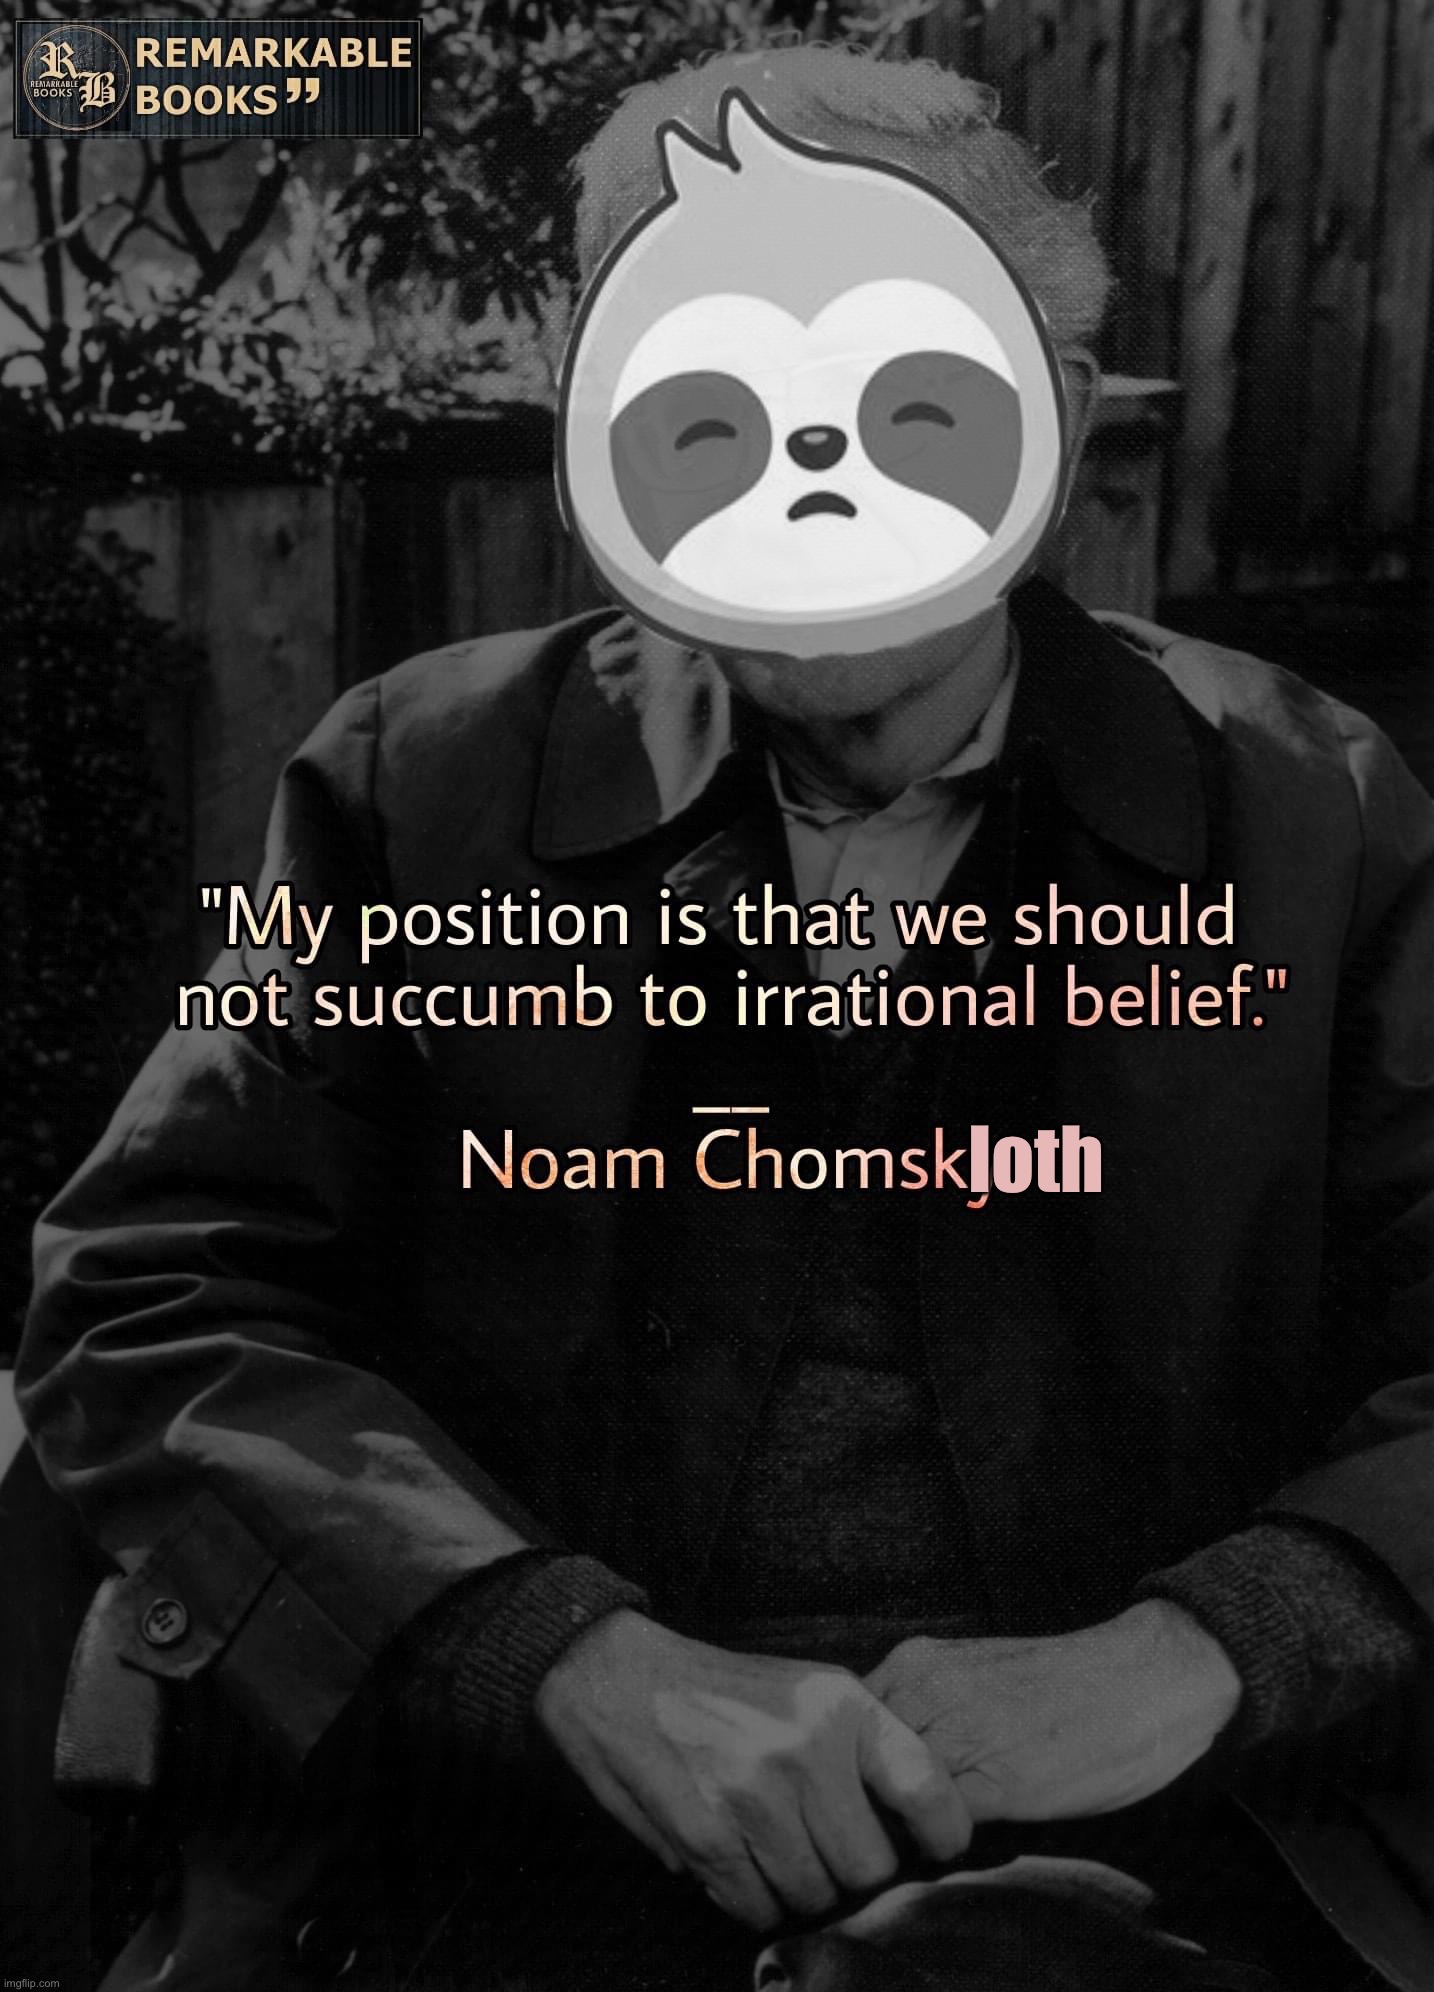 I said this | loth | image tagged in noam chomsky,i,said,this,noam,chomskloth | made w/ Imgflip meme maker